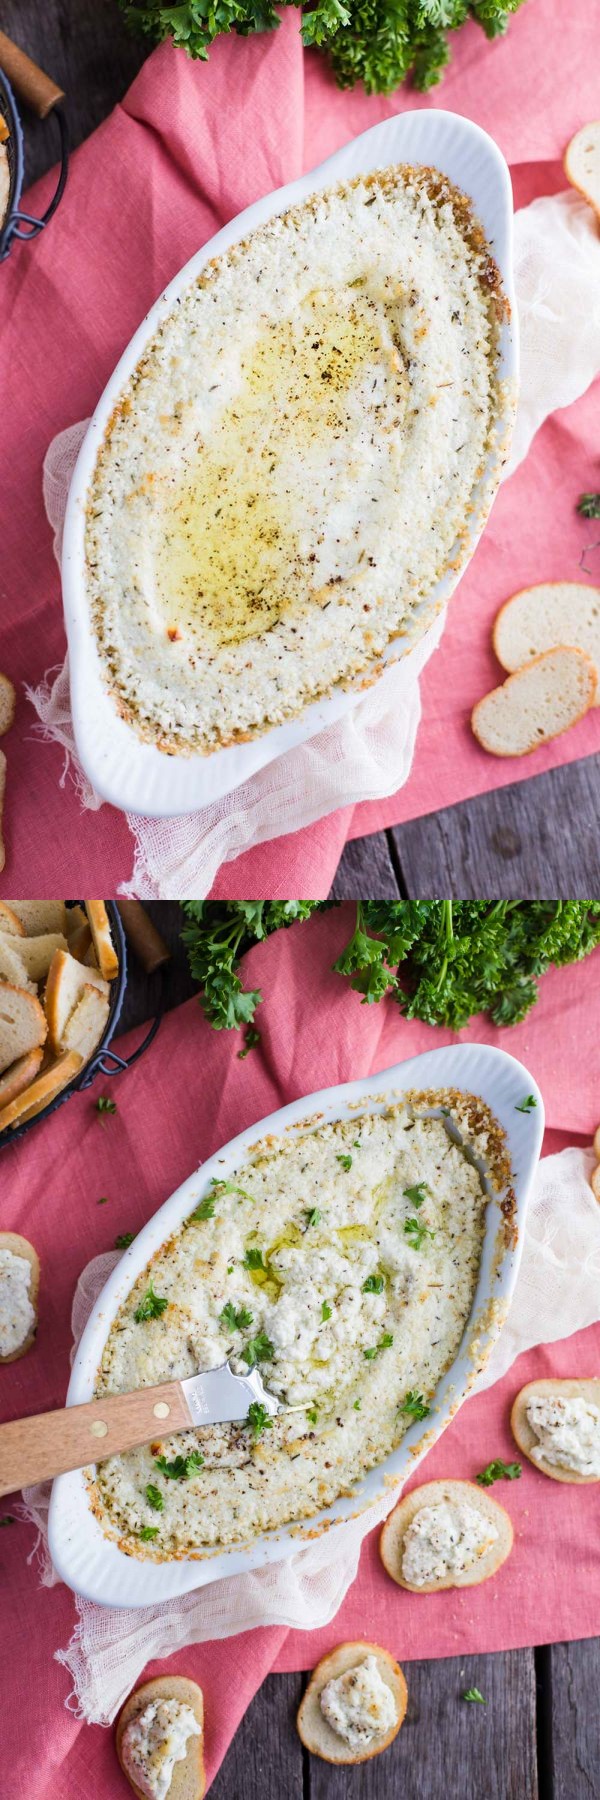 Baked Goat Cheese Dip